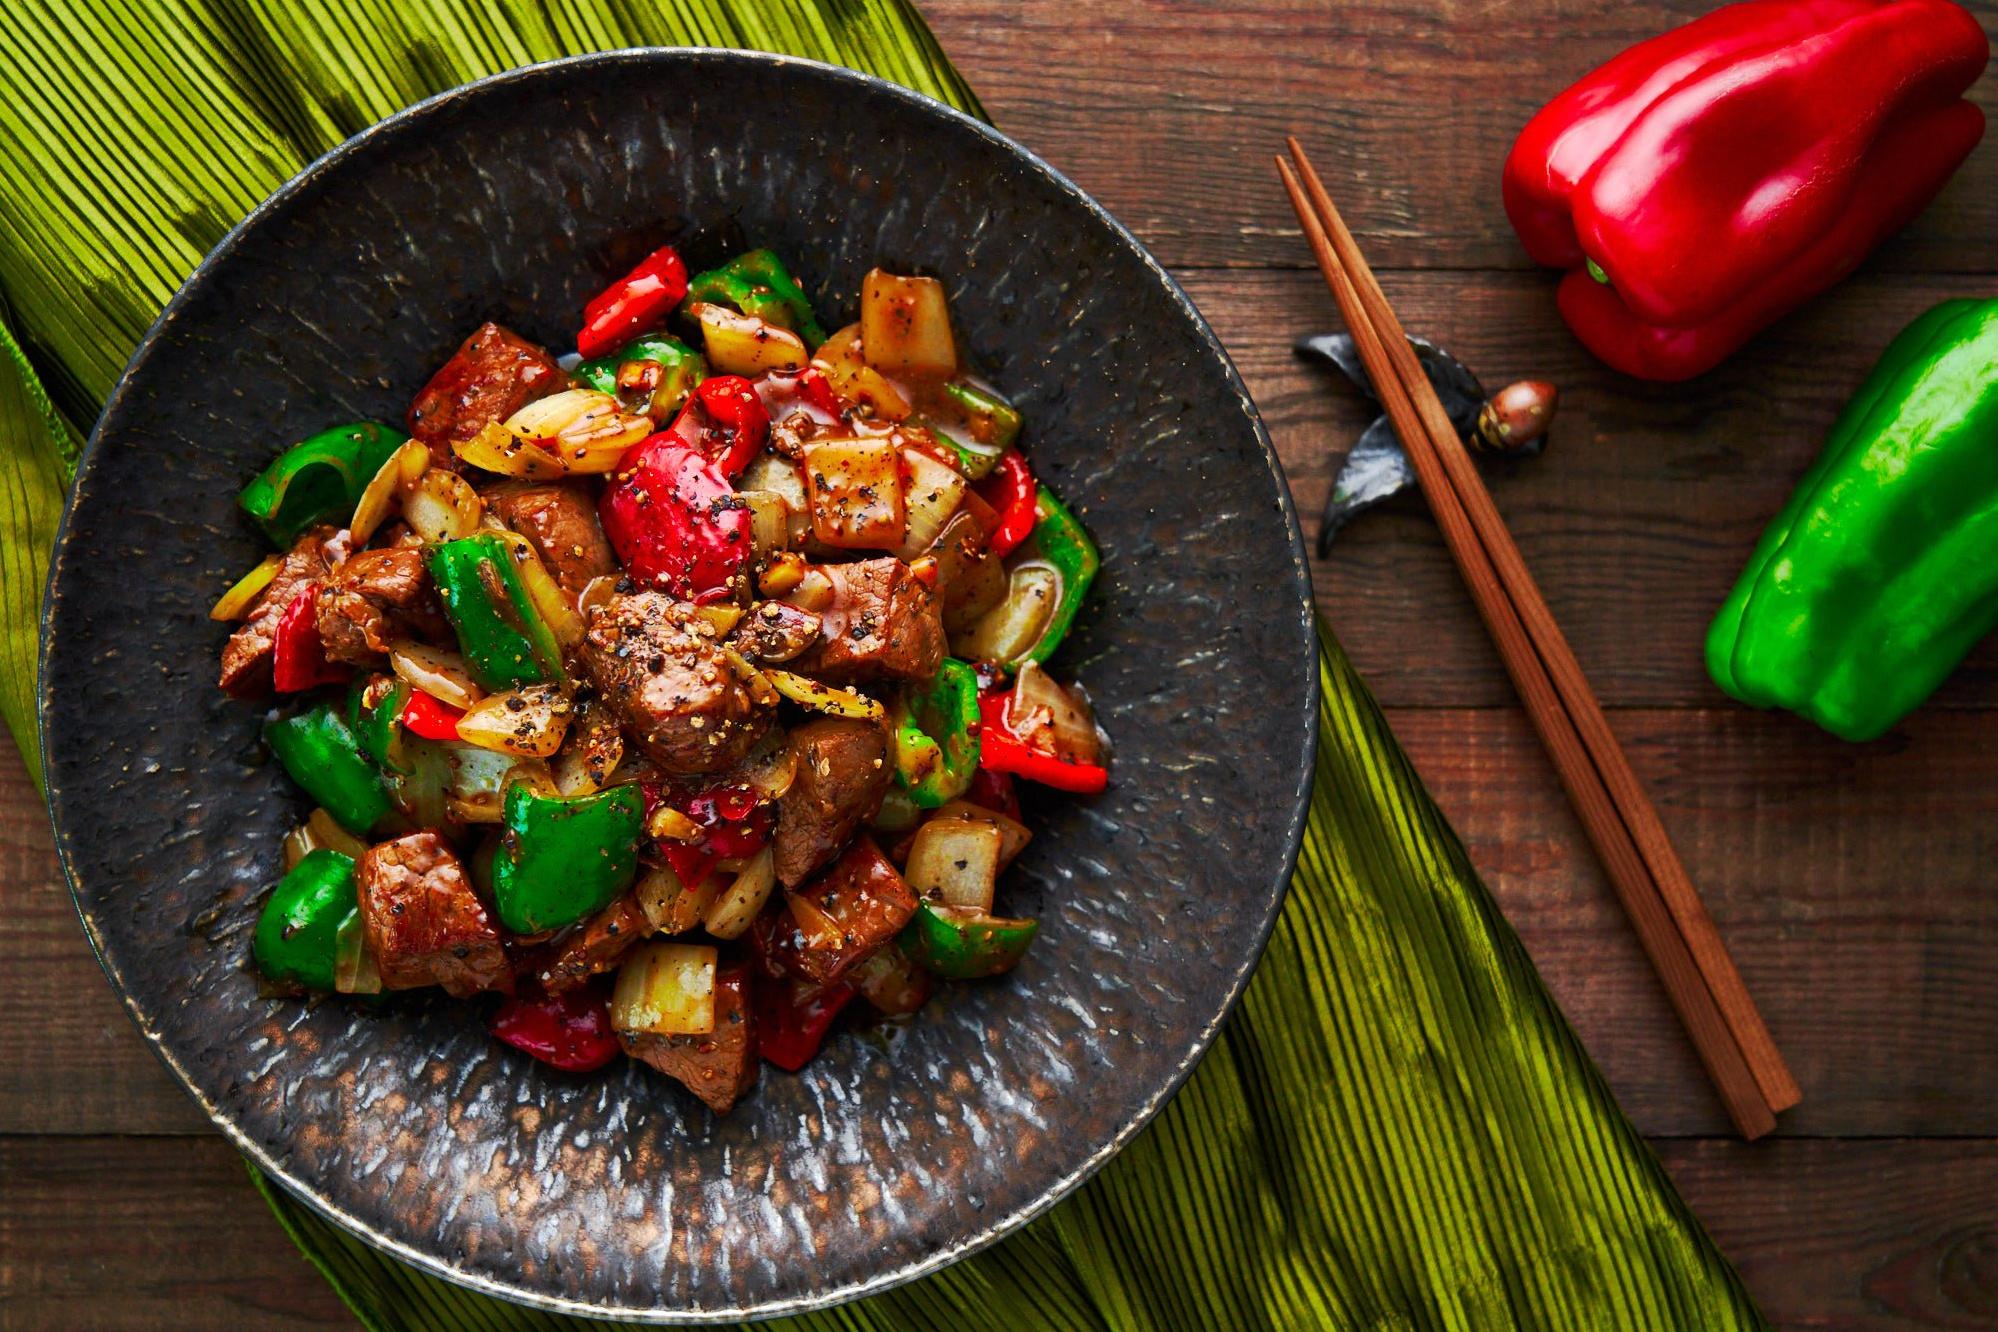  The bold flavors of black pepper, soy sauce, and oyster sauce come together in perfect harmony in this dish.